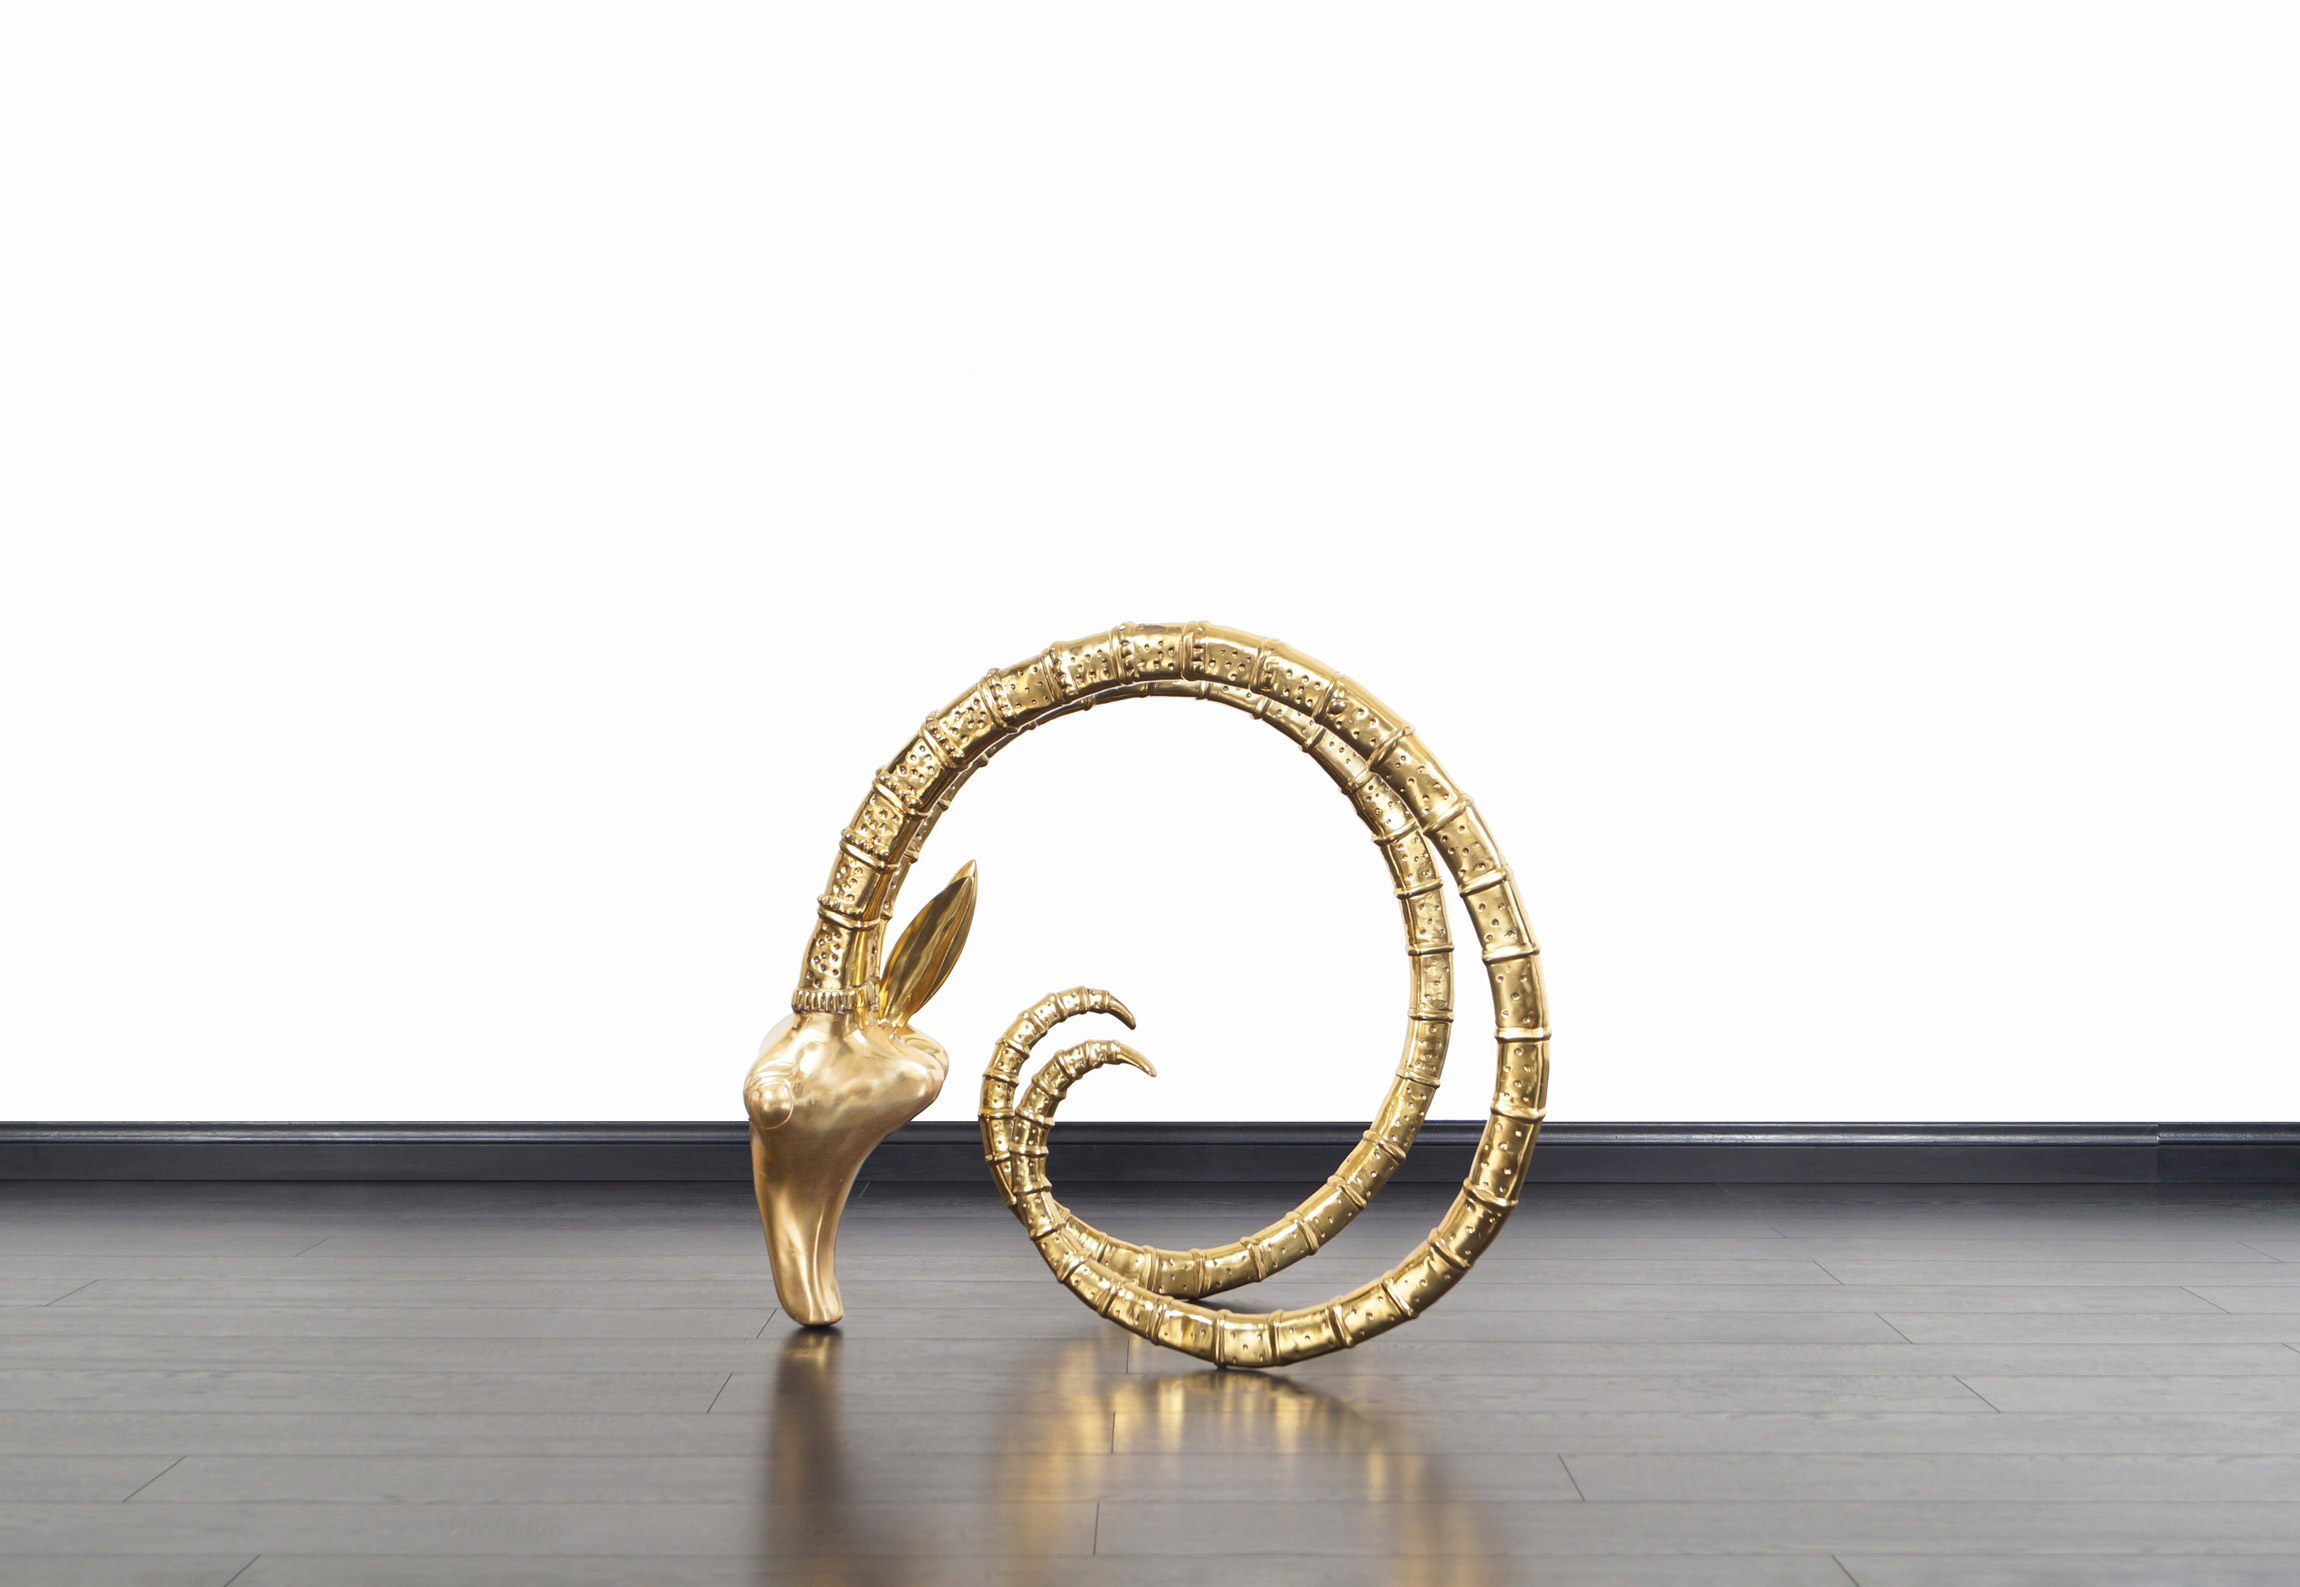 Exceptional Brass Ibex Rams Head Sculptures in the style of Alain Chervet